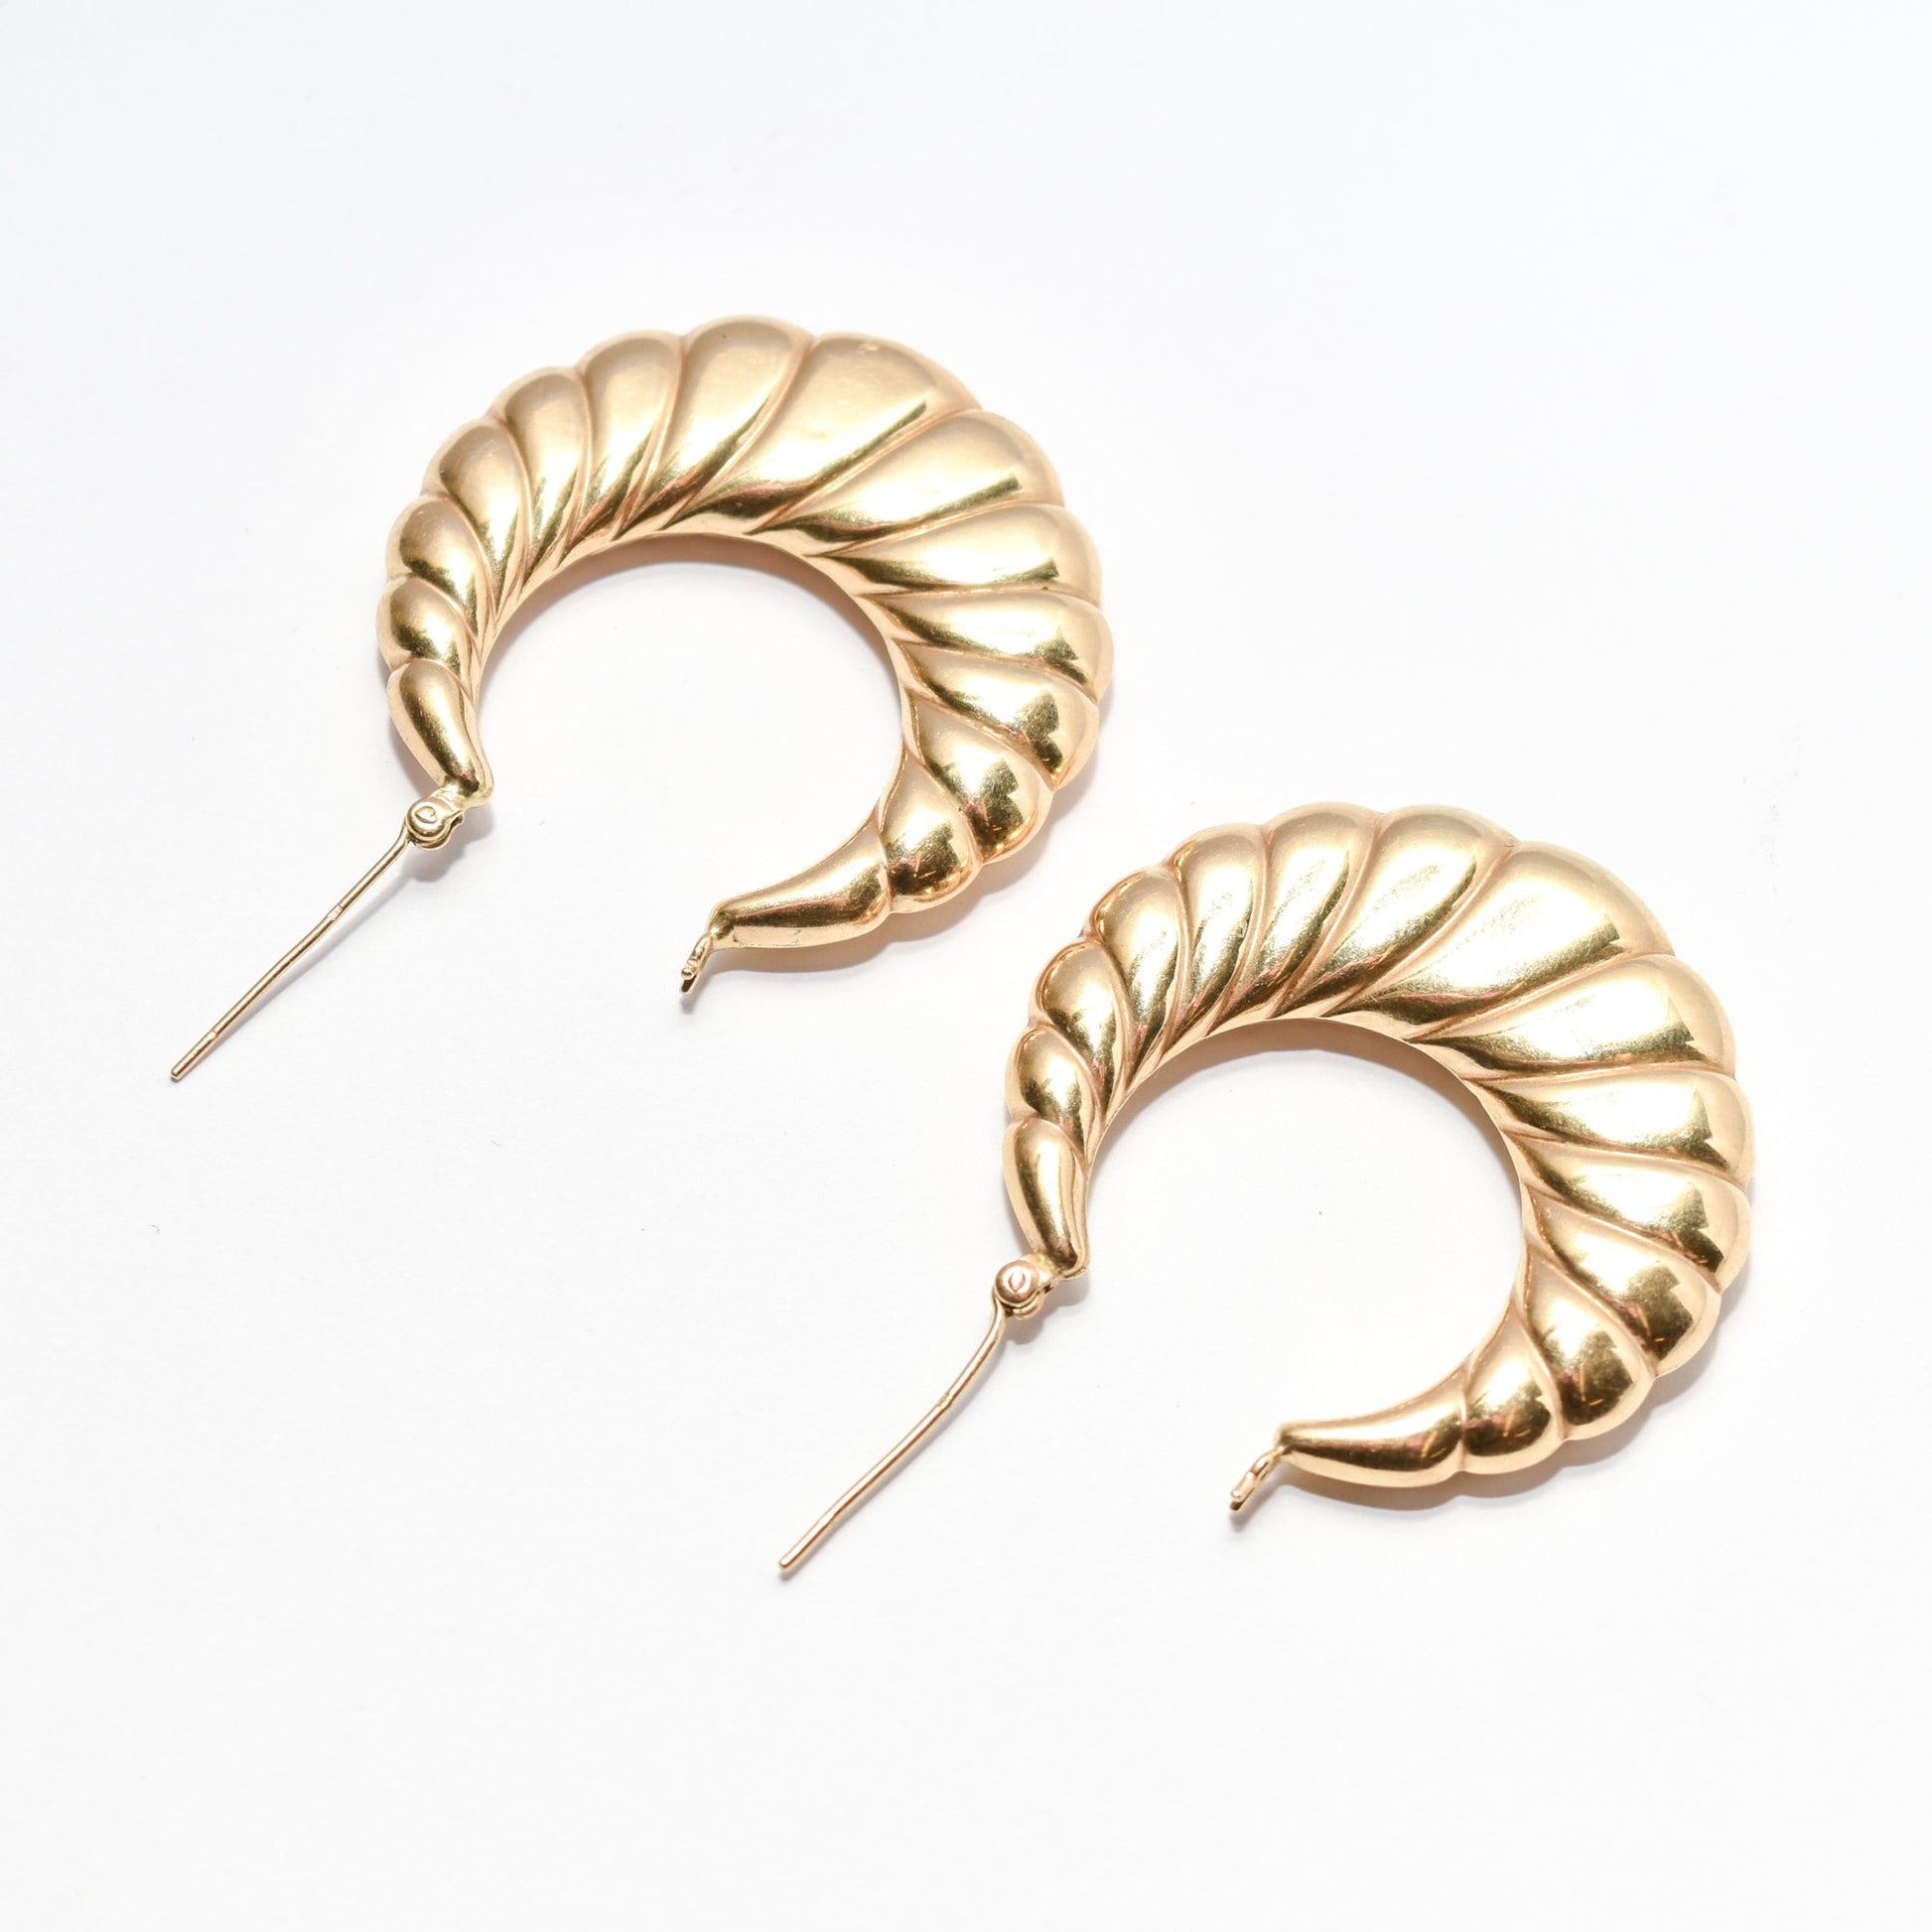 MCM 14K gold puffed scallop hoop earrings, medium-sized 36mm, estate jewelry on a white background.